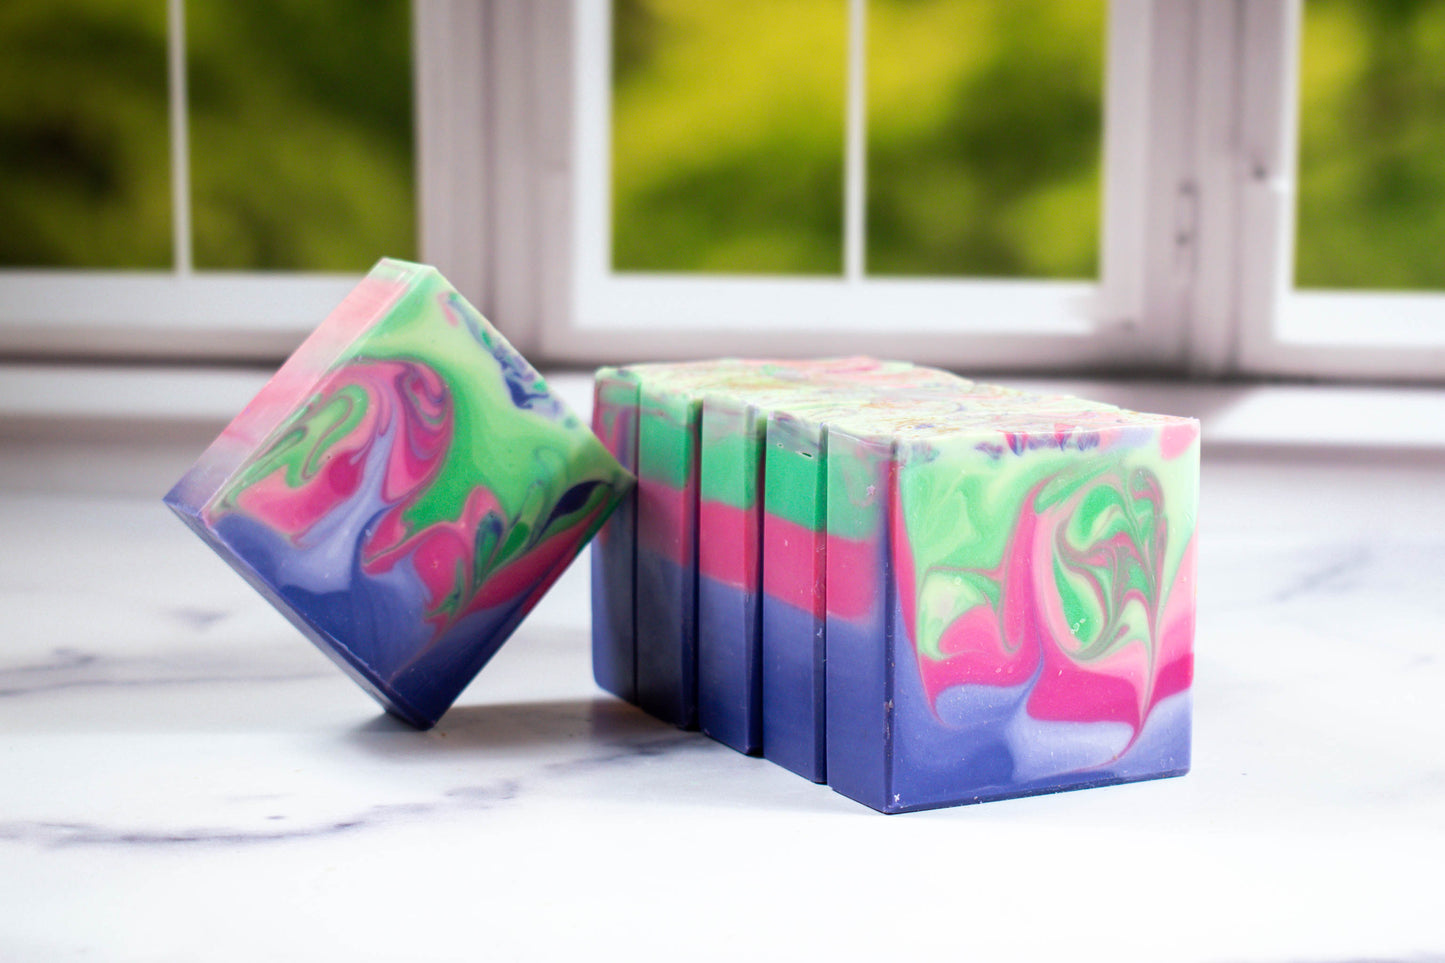 Enchanted soap with purple, pink, and green swirls.